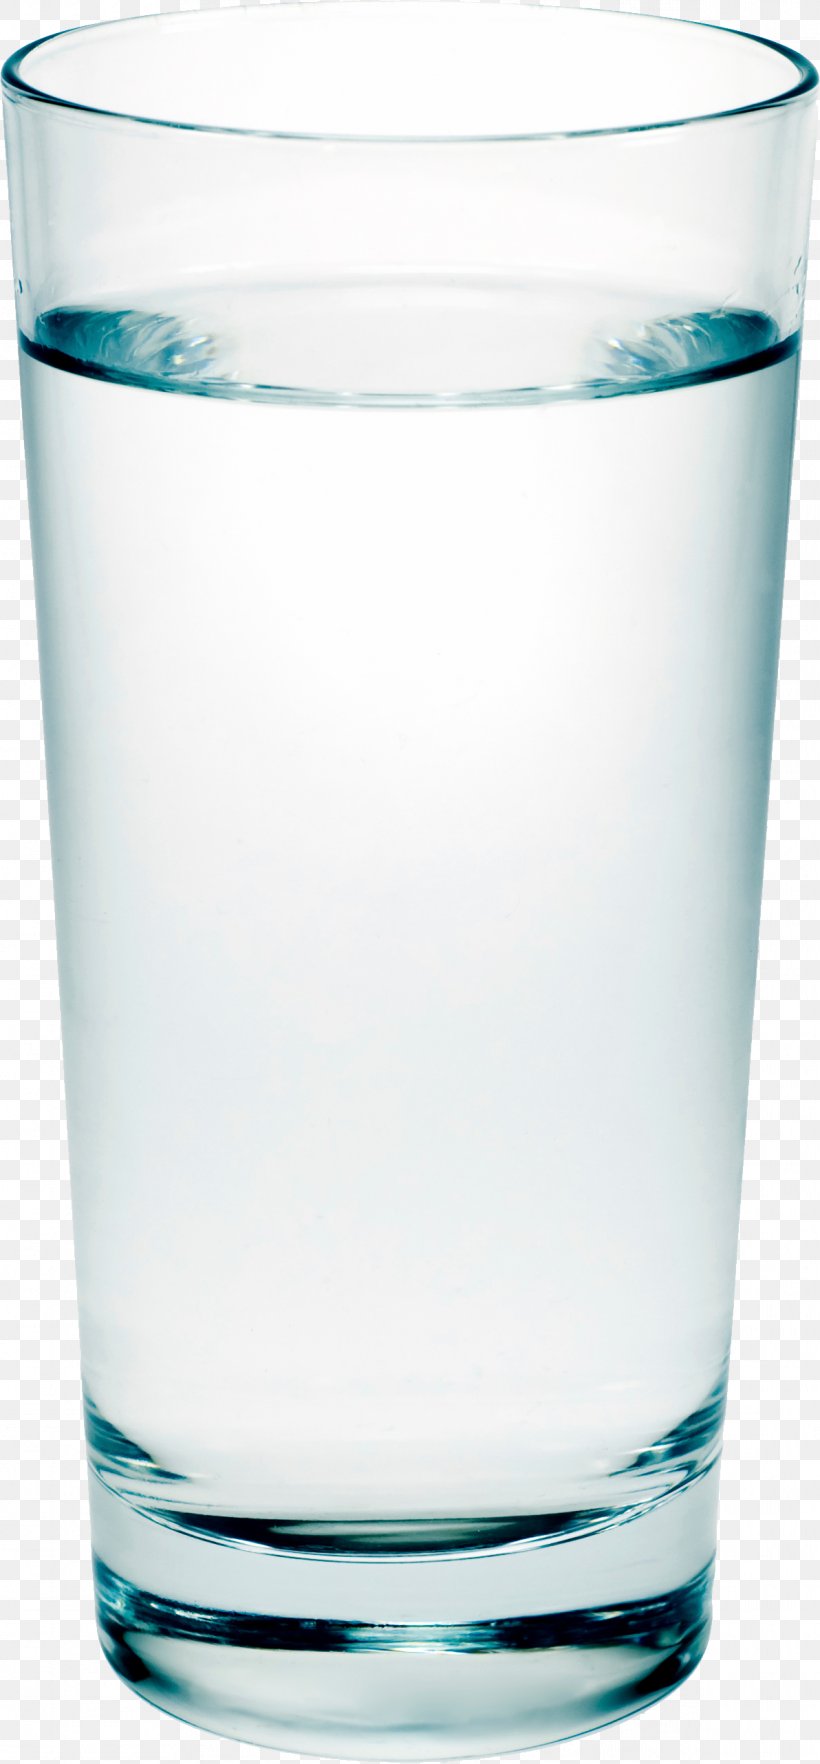 Blue Transparent Water Glass Without Matting, PNG, 1192x2565px, Water, Aqua, Bottle, Bottle Wall, Drink Download Free